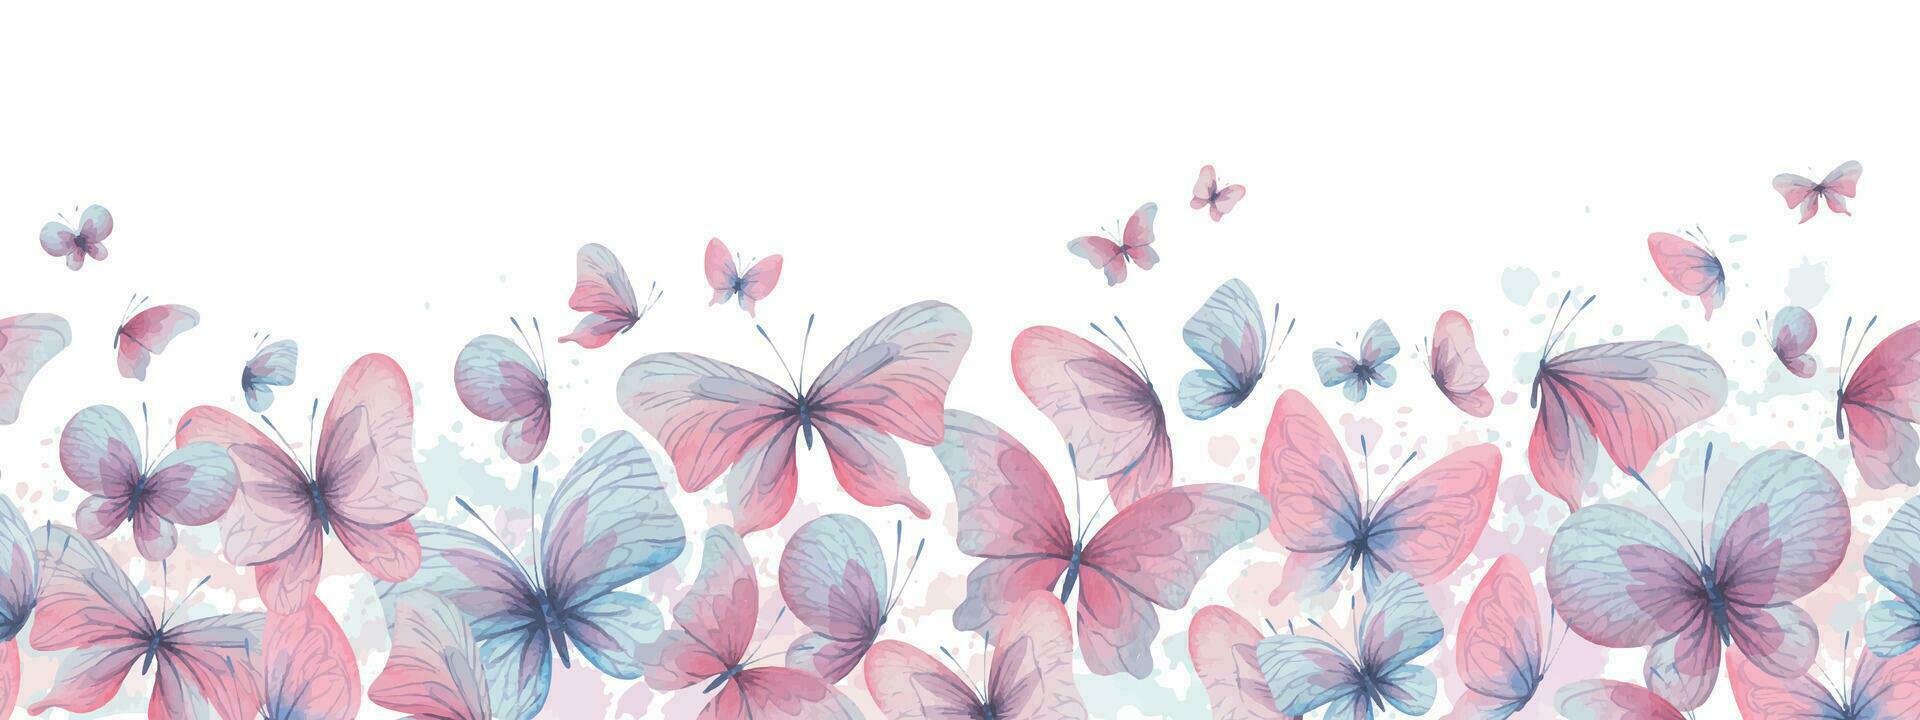 Butterflies are pink, blue, lilac, flying, delicate with wings and splashes of paint. Hand drawn watercolor illustration. Seamless border on a white background, for design. vector